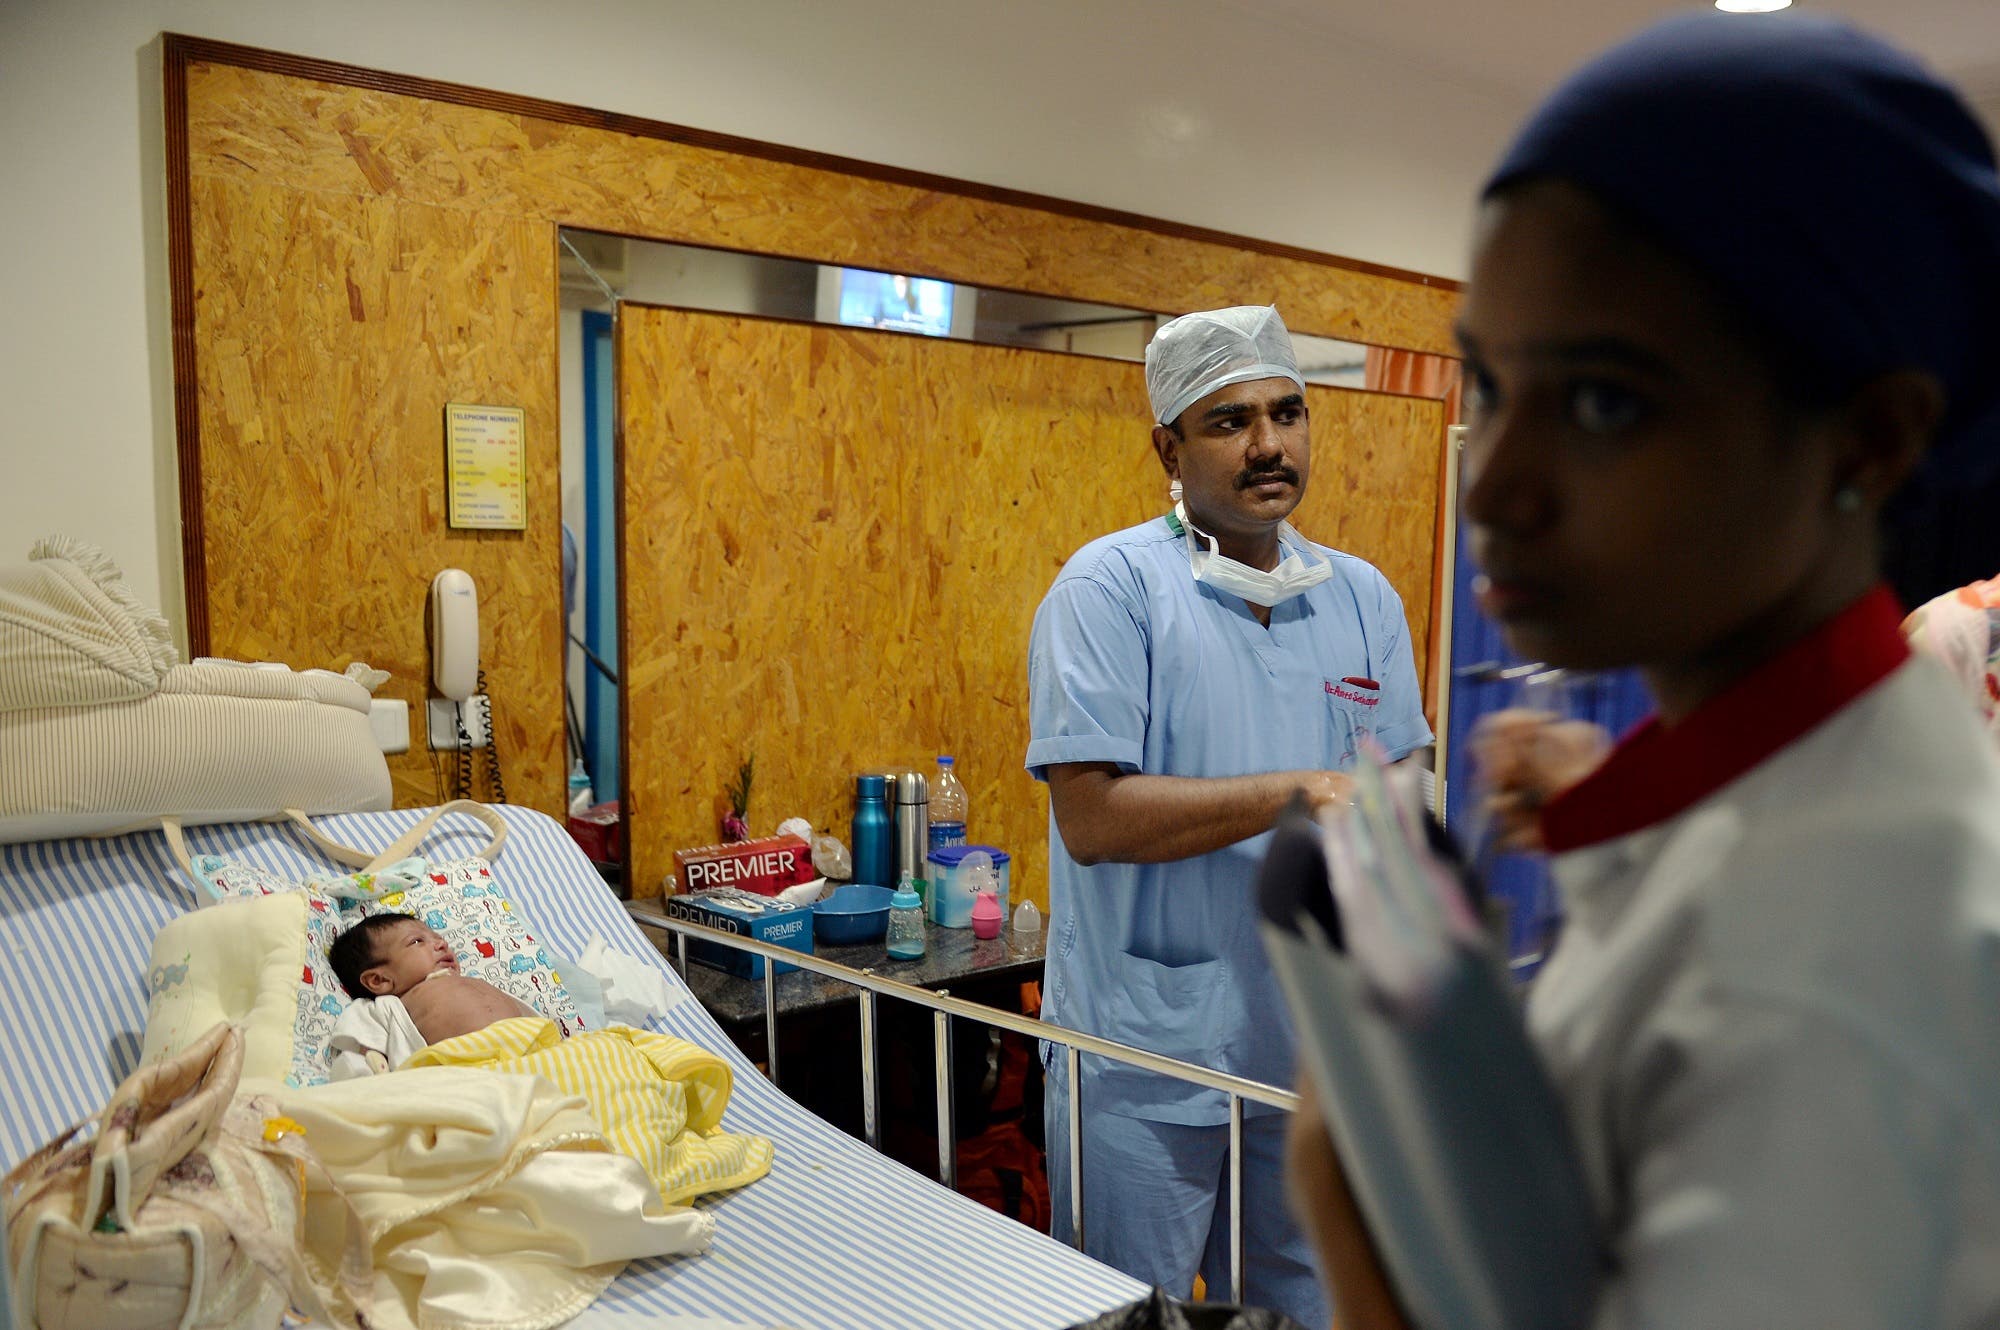 A cardiac surgeon visiting one-month-old Abdulla (L) from Bahrain, who underwent cardiac surgery at the Frontier Lifeline Hospital in Chennai on March 26, 2014. (File photo: AFP)